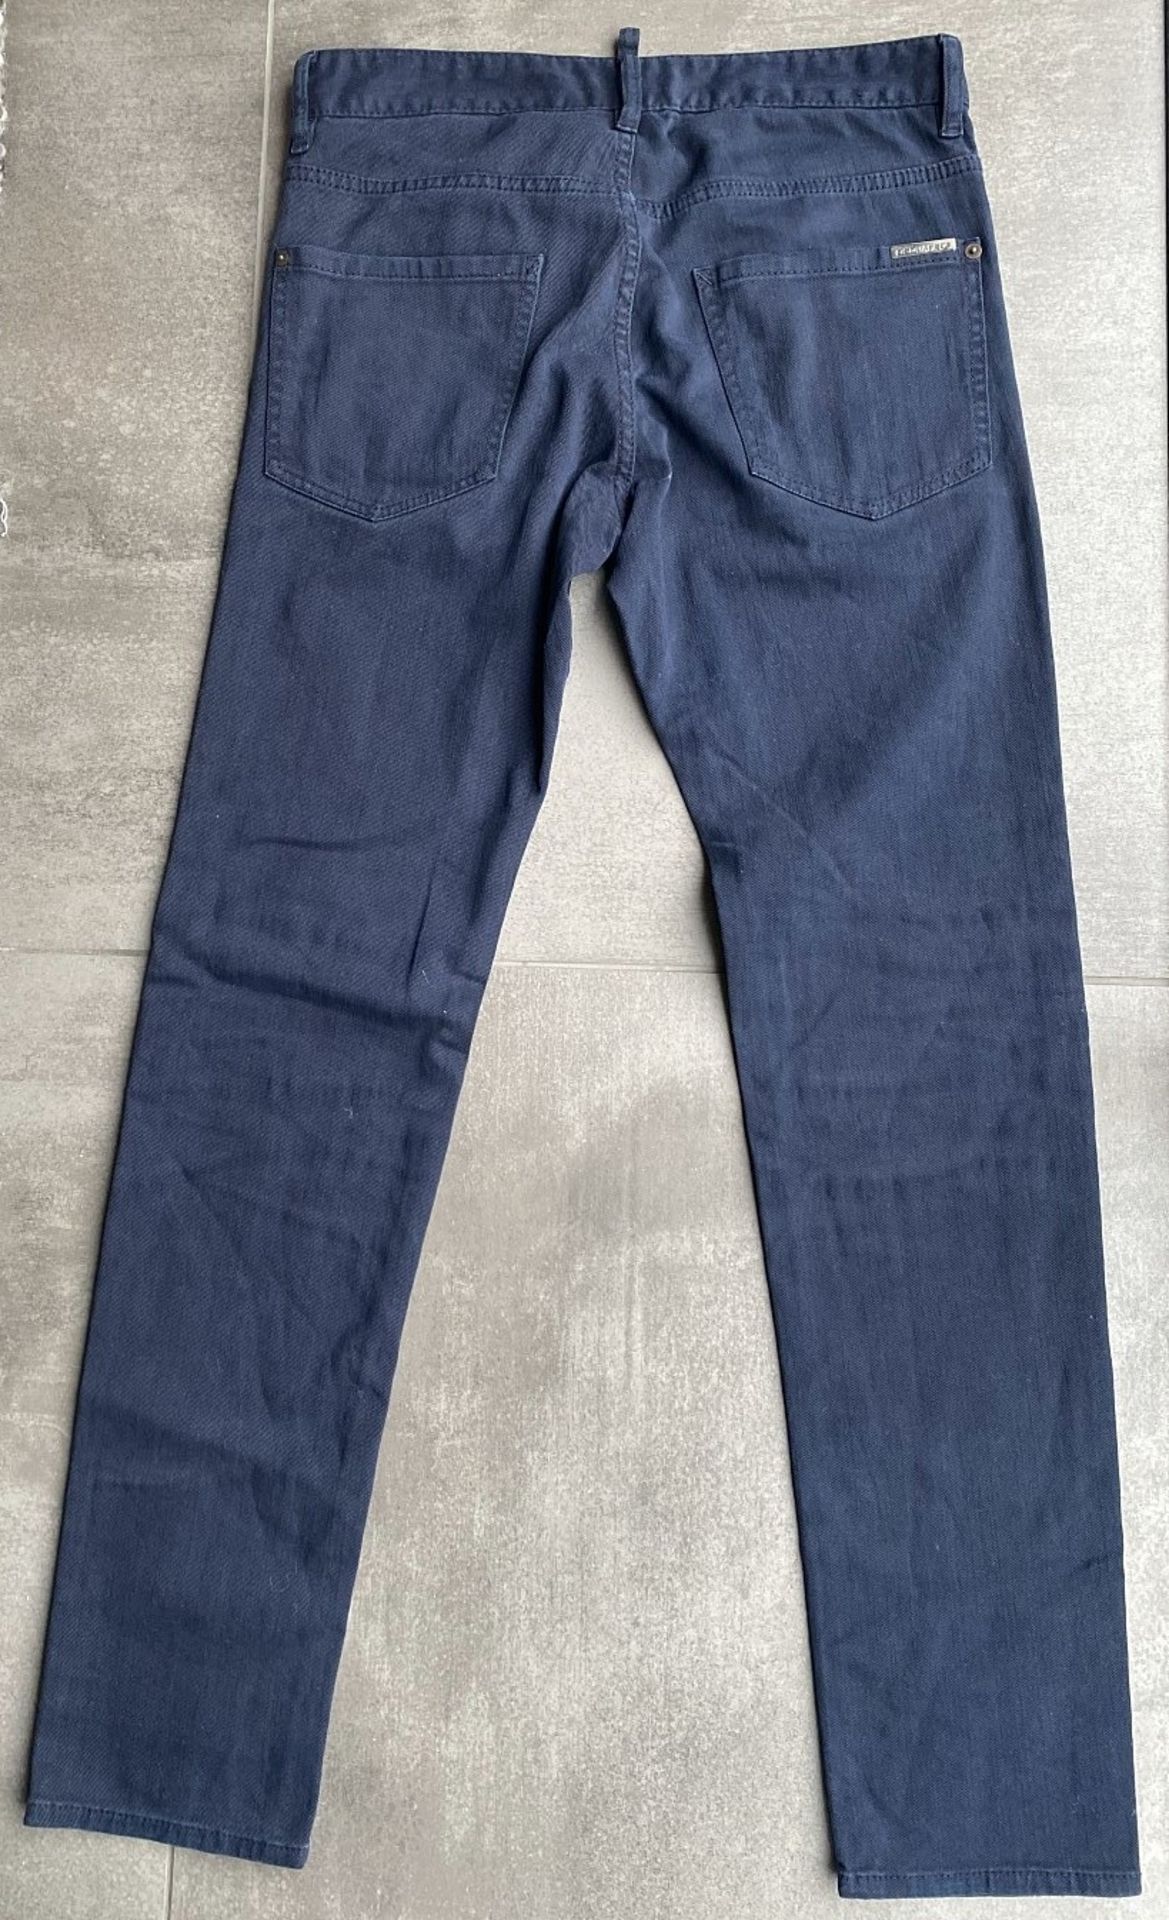 1 x Pair Of Men's Genuine Dsquared2 Designer Jeans In Navy - Waist Size: UK 30 / ITALY 46 - Preowned - Image 4 of 7